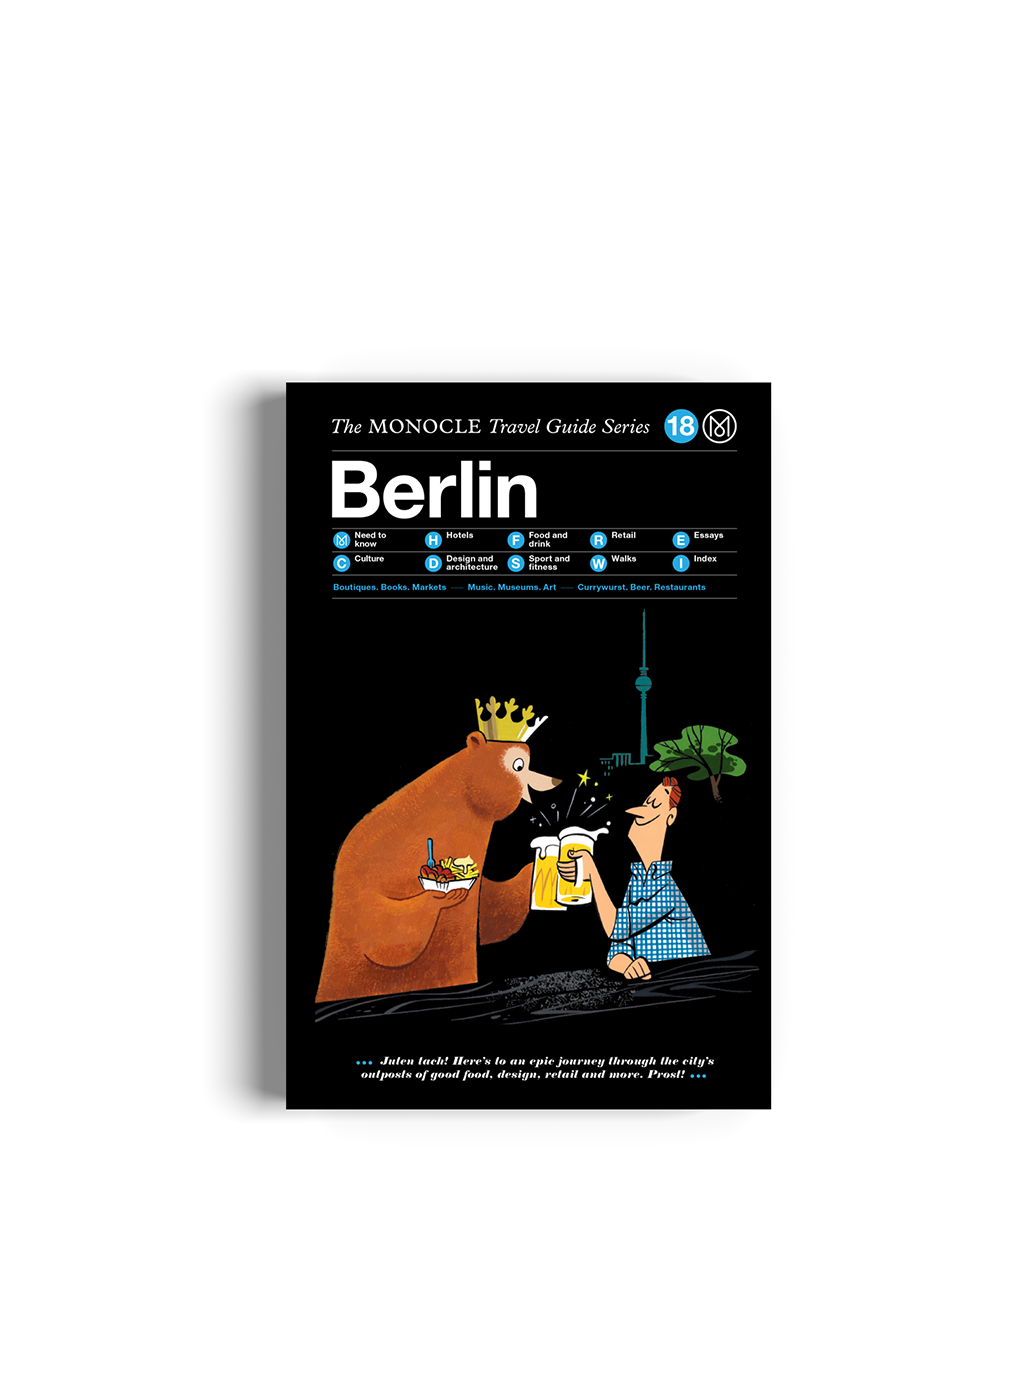 BERLIN: THE MONOCLE TRAVEL GUIDE SERIES